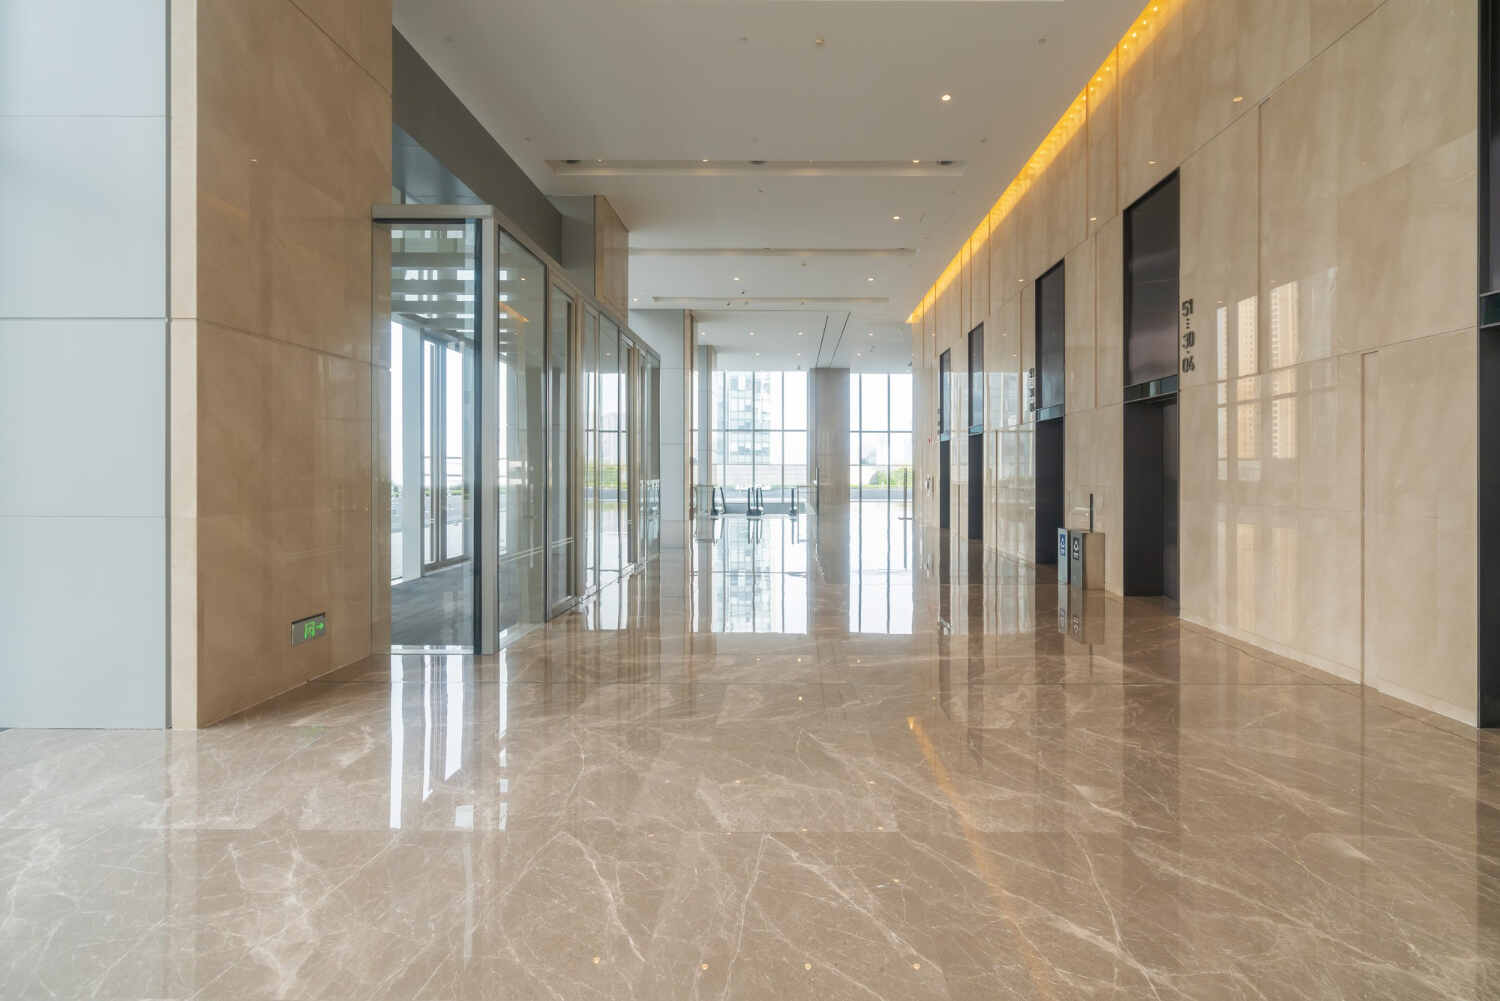 SET THE TREND WITH EXCEPTIONAL MARBLE FLOORING